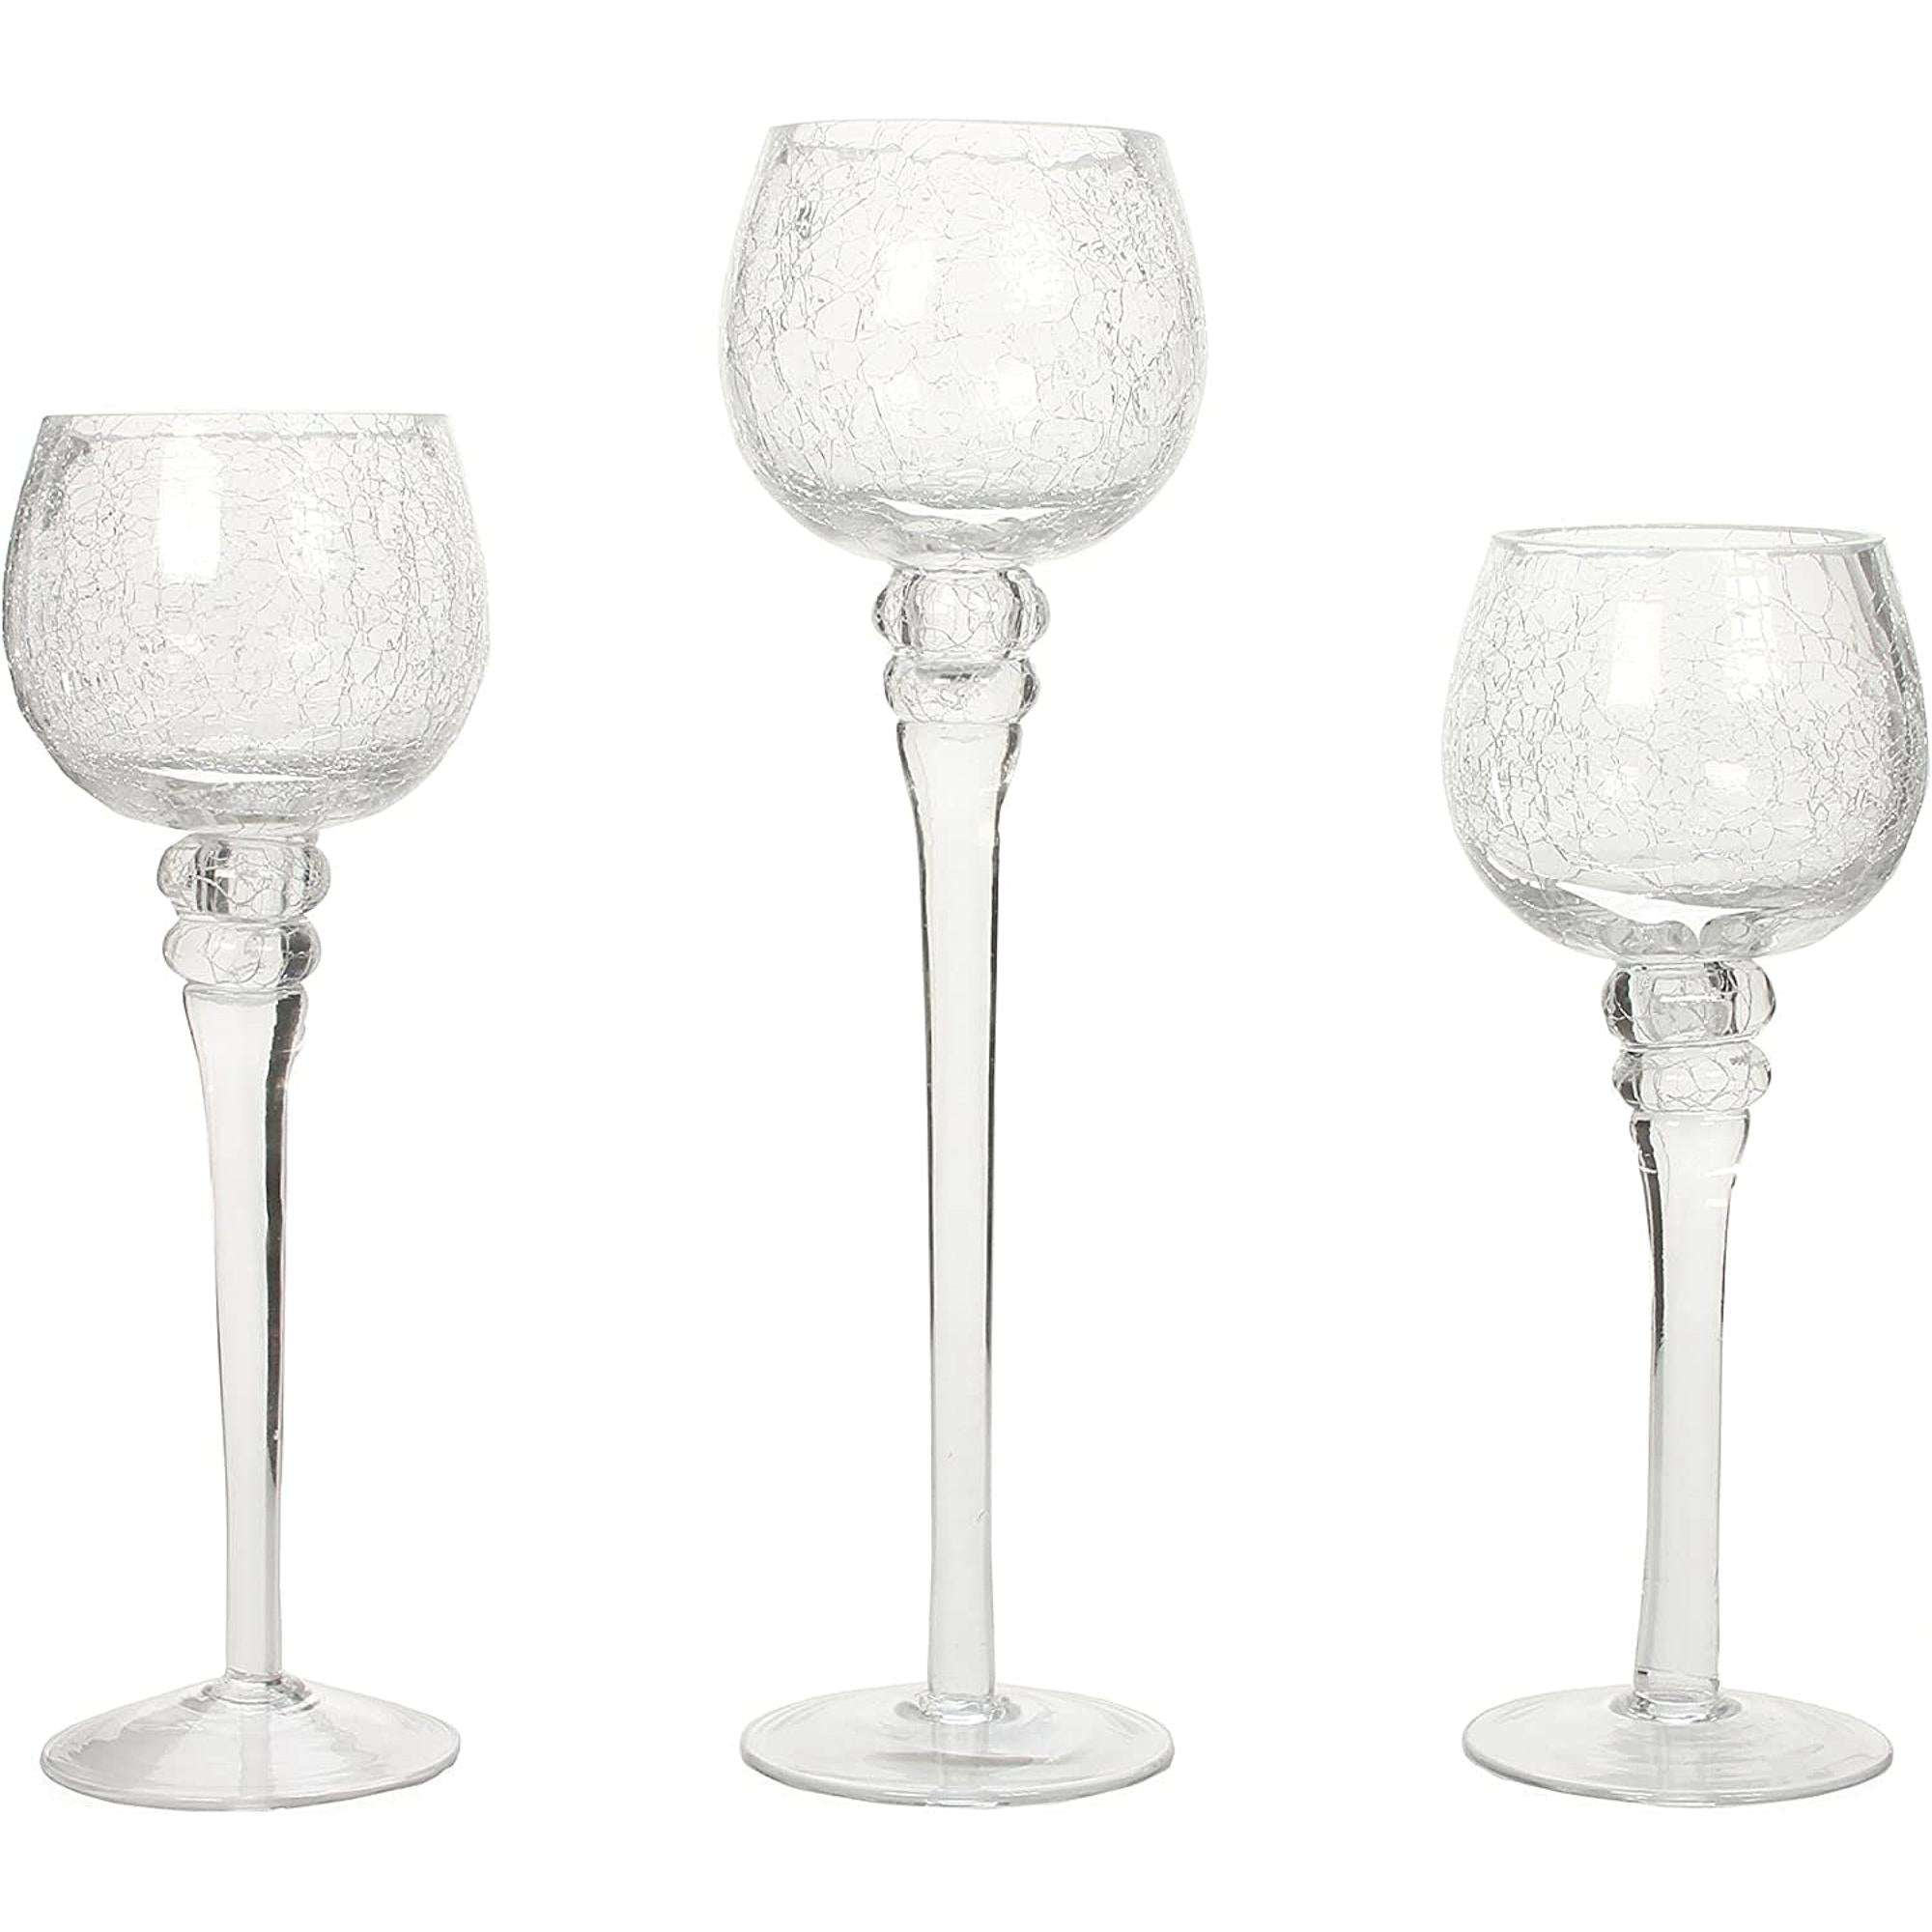  Denique Glass Candle Holder Set of 3, Clear Crystal